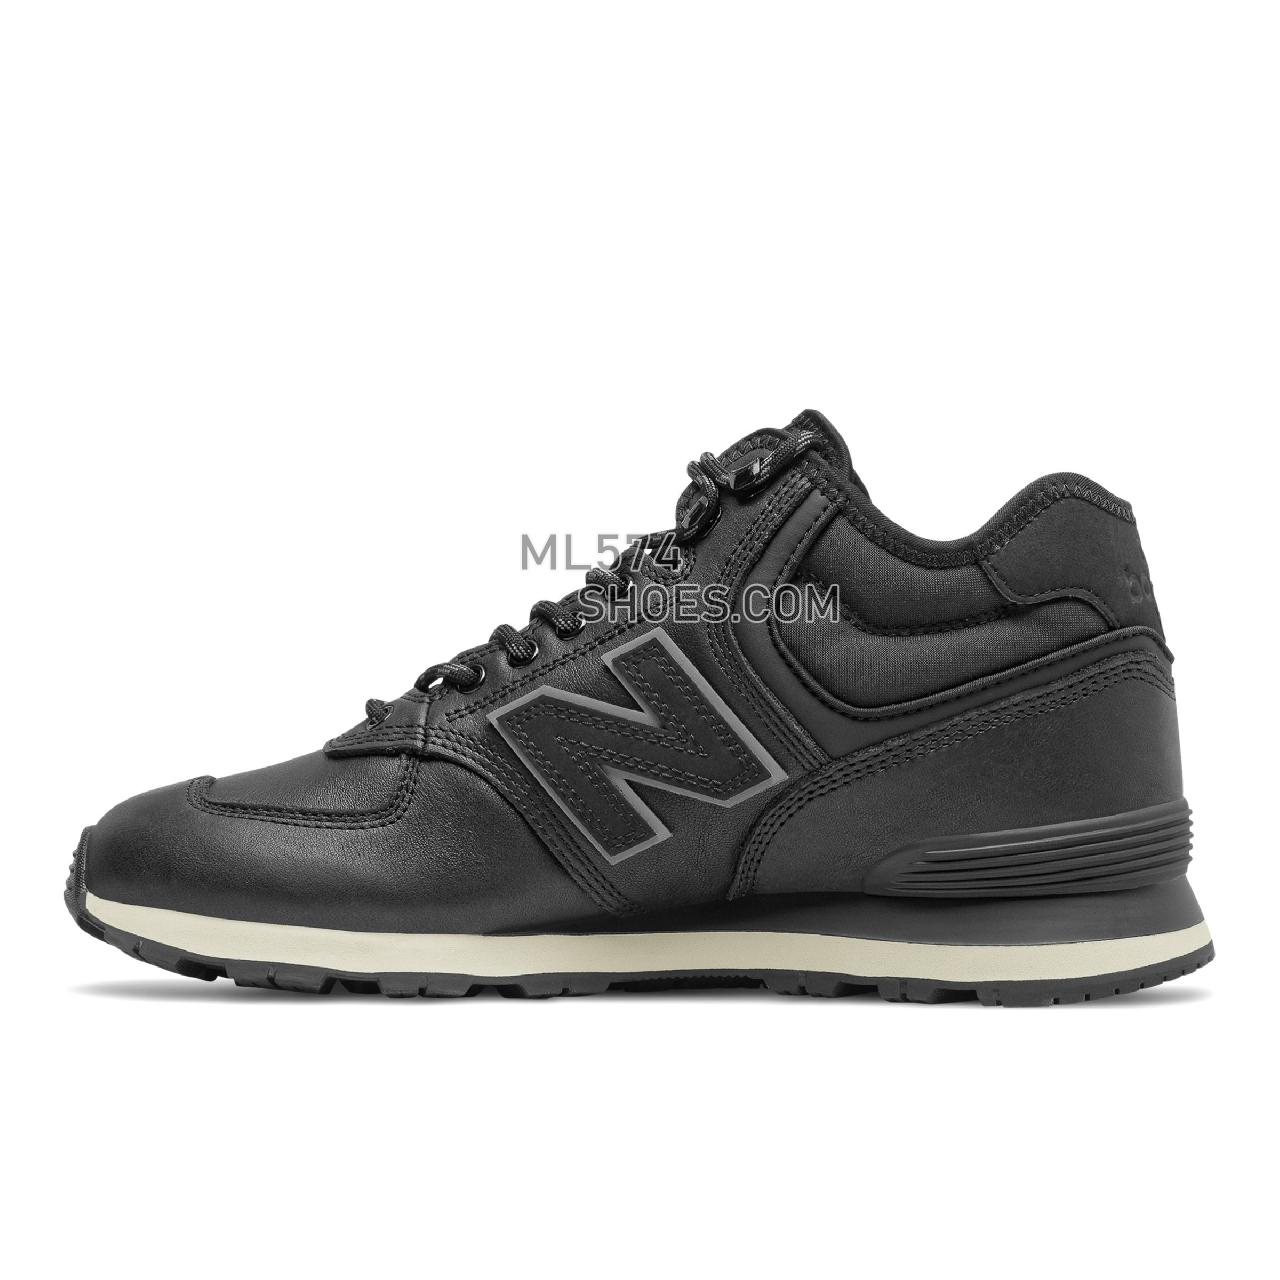 New Balance MH574V1 - Men's Classic Sneakers - Black with Moonbeam - MH574GX1